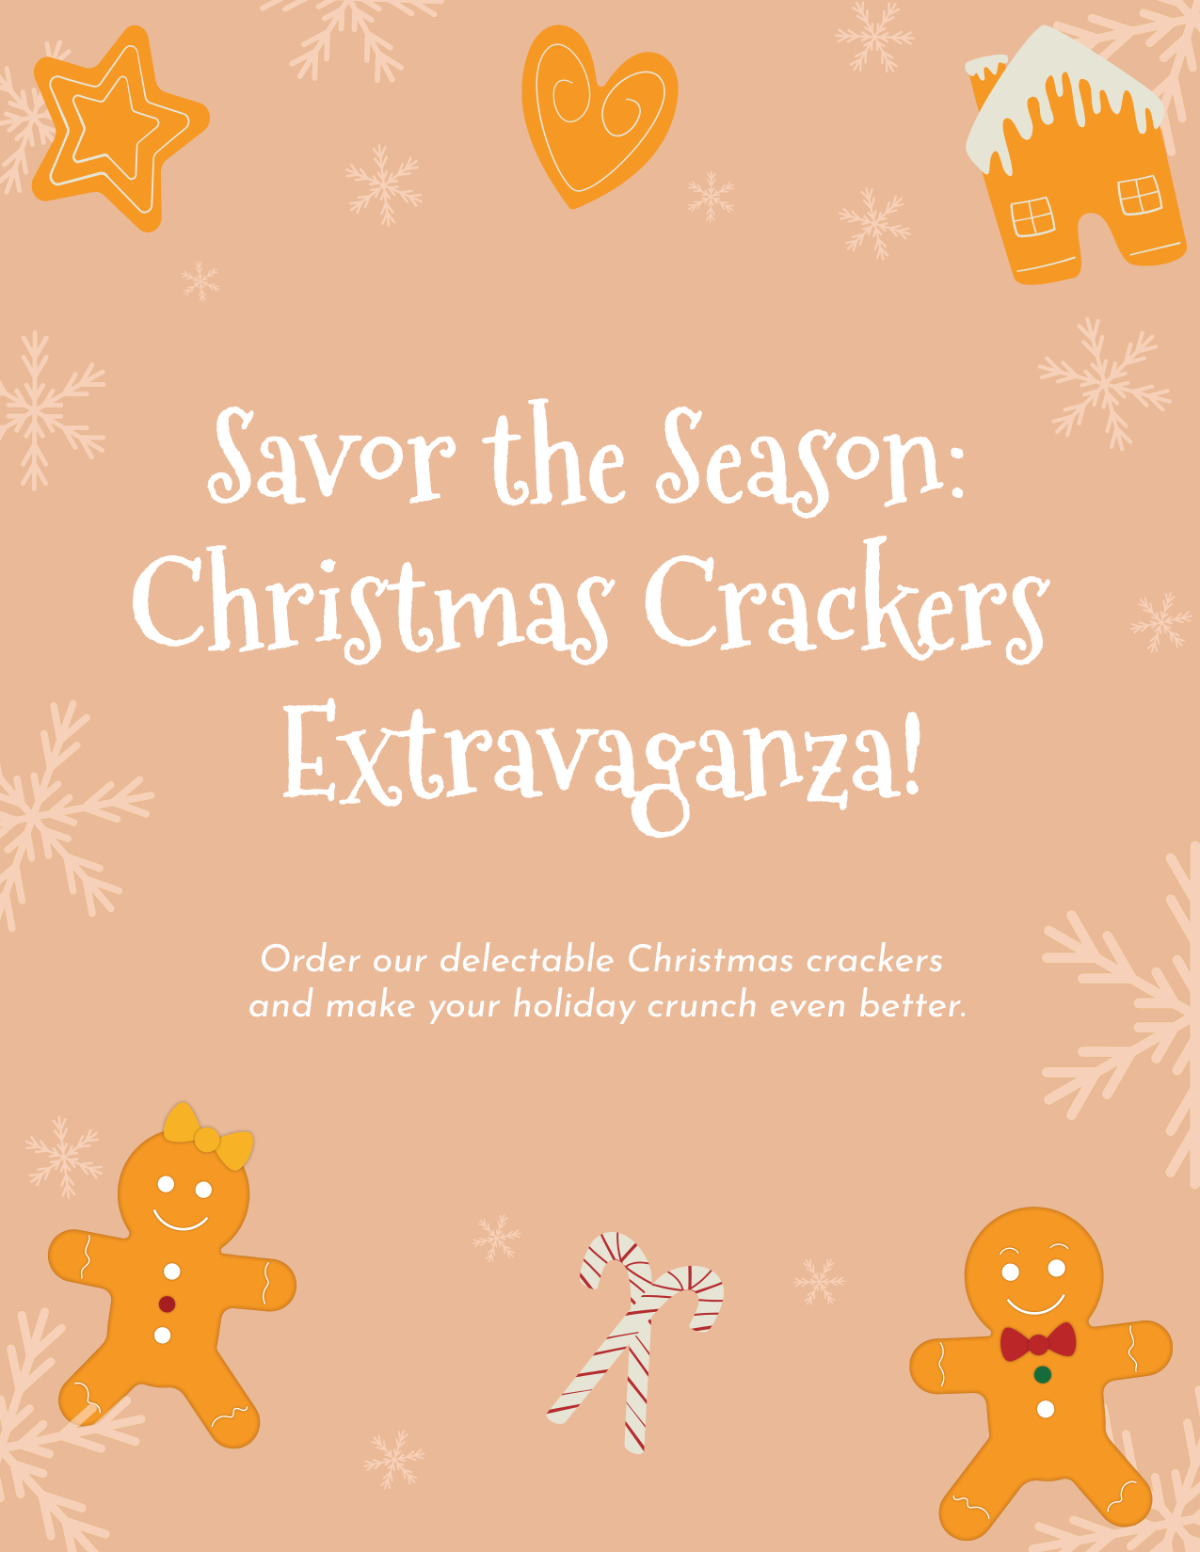 Christmas Crackers Sale Flyer Template